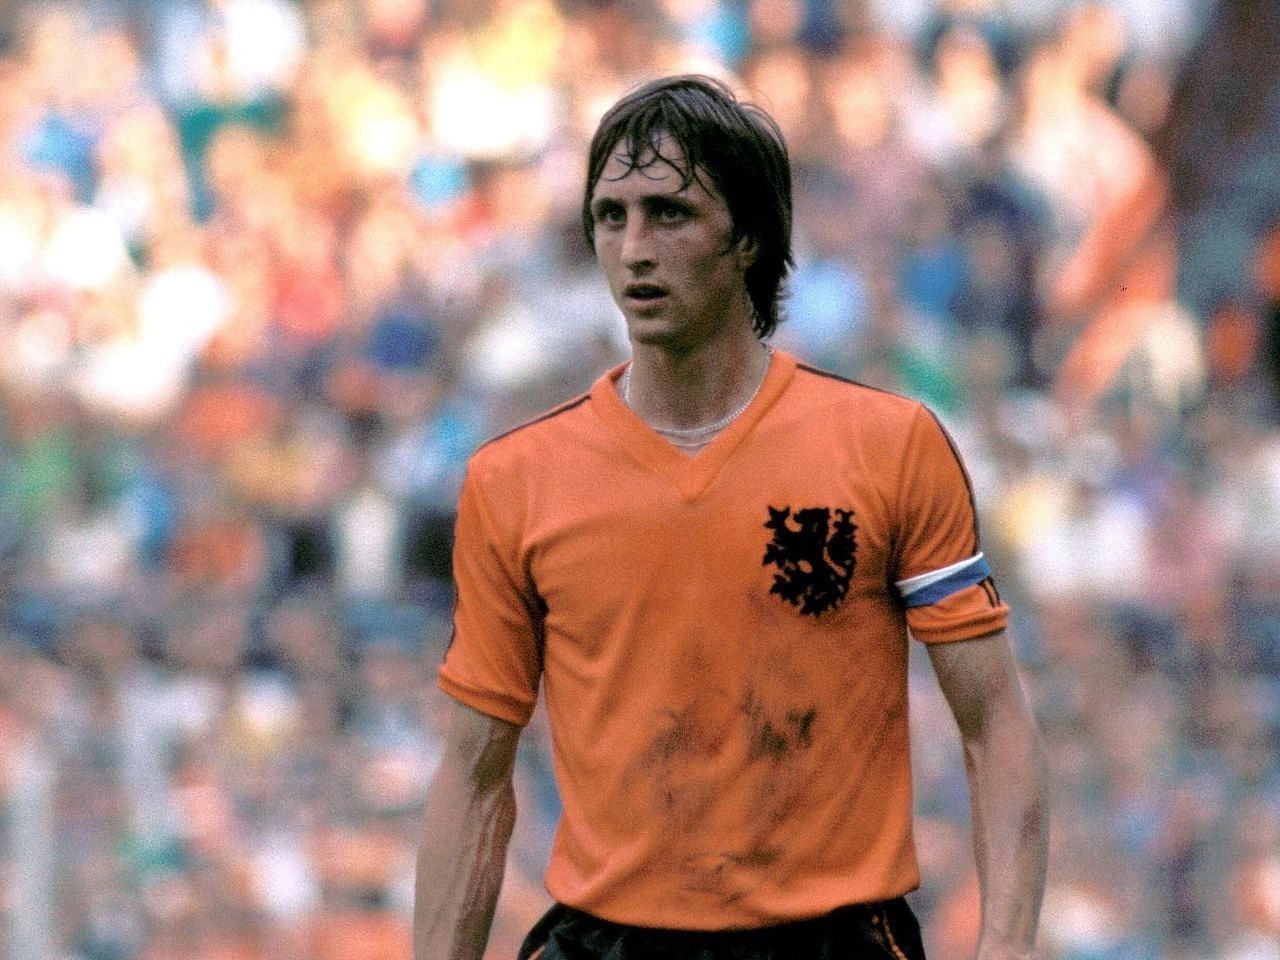 Johan Cruyff in action for Netherlands (pic cred: Eurosport)